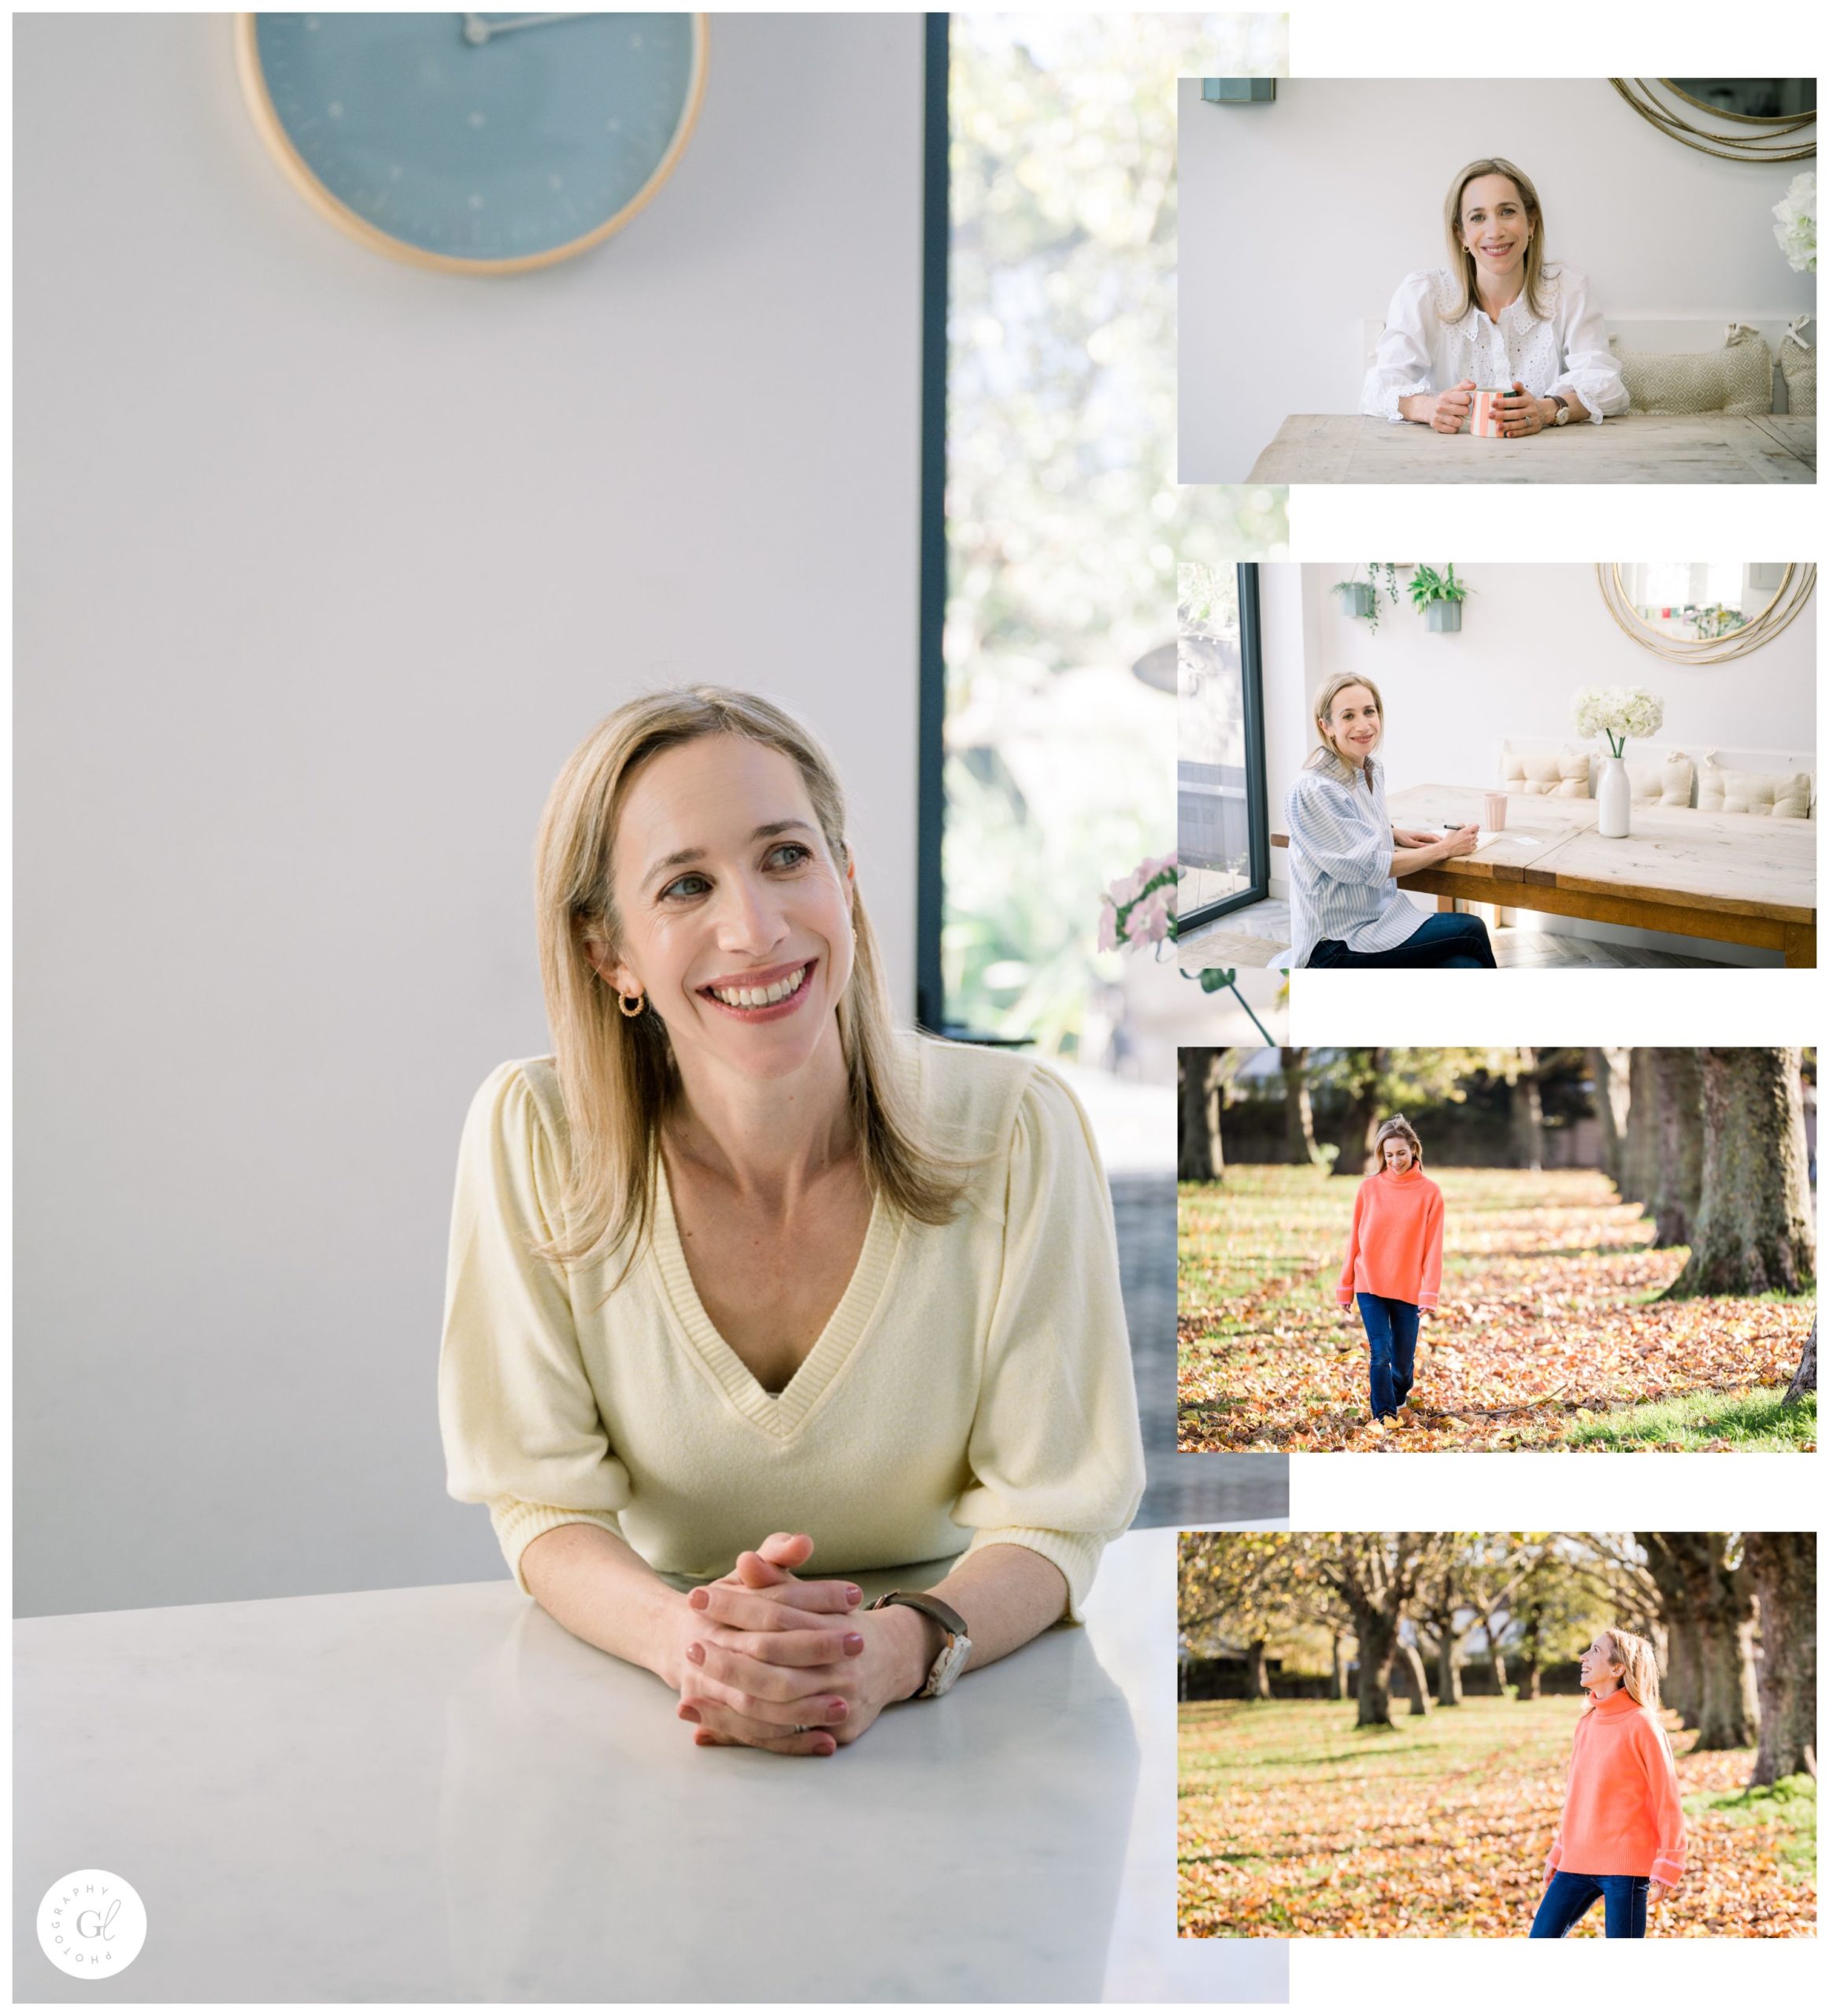 Images of blond-haired smiling lady in her home and also outdoors walking through the autumn leaves